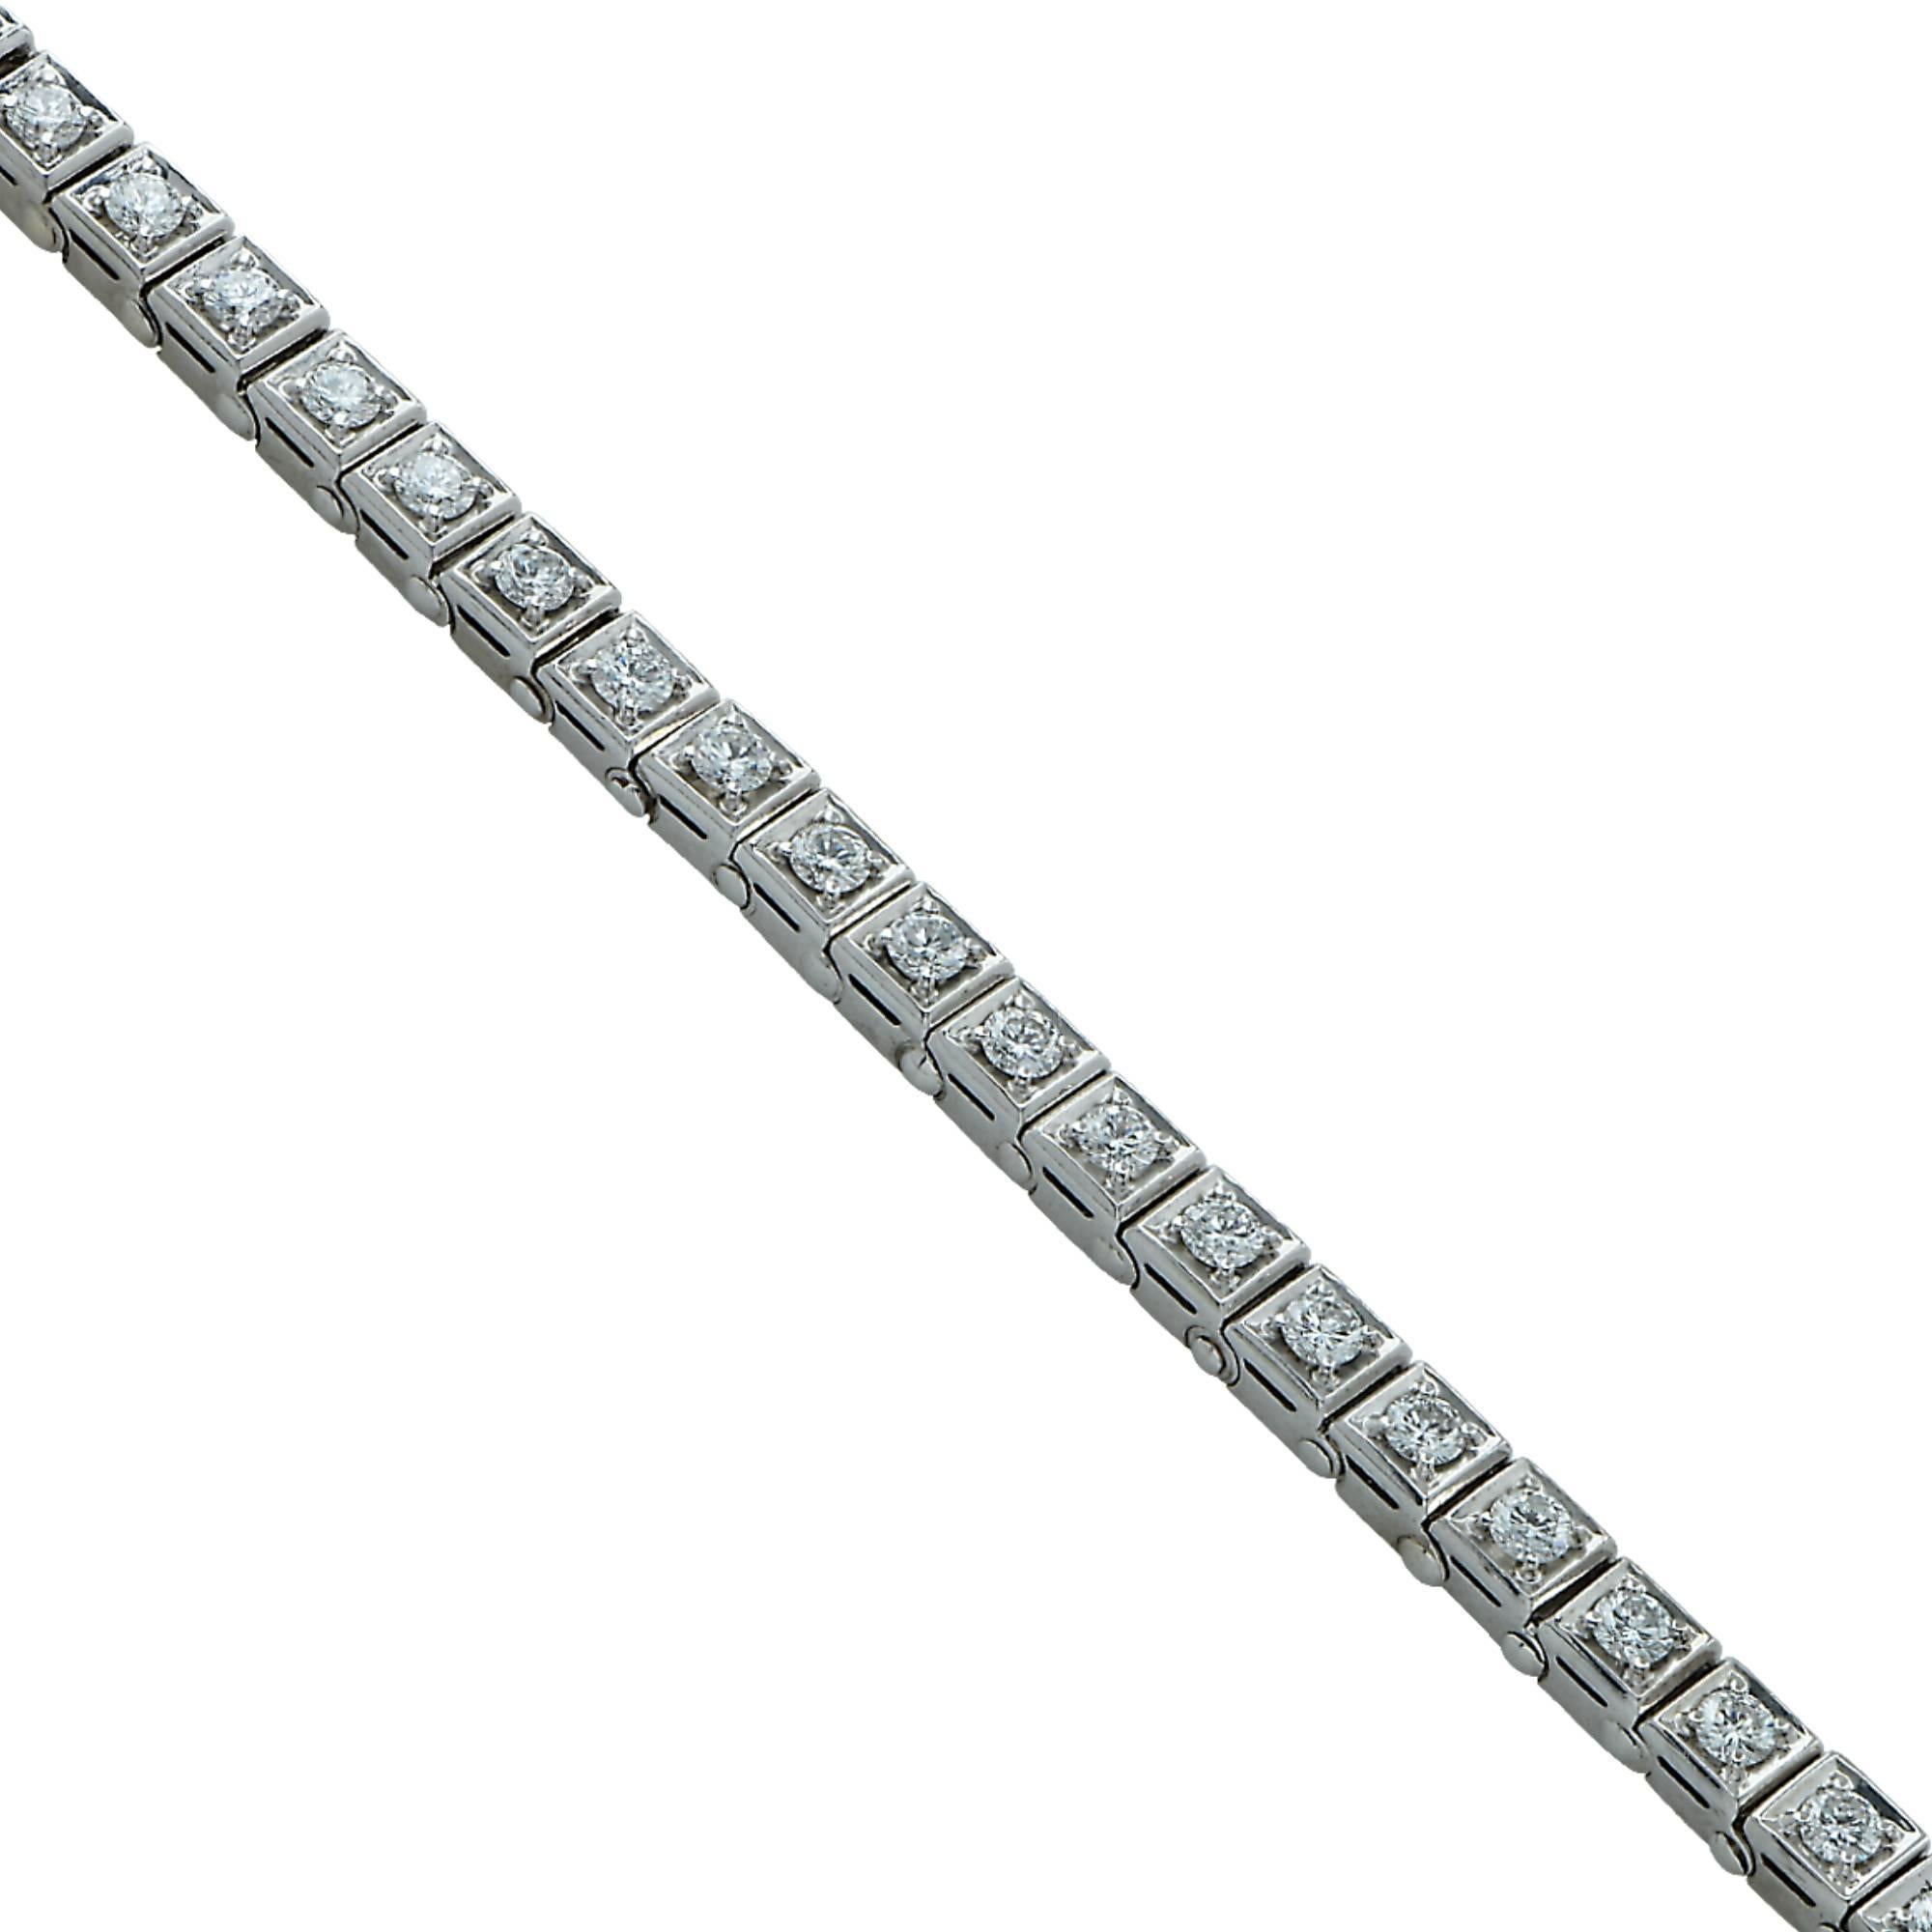 18 Karat White gold bracelet featuring 30 round brilliant cut diamonds weighing approximately 3.75cts F color and VS clarity. This gorgeous bracelet measures 6.75 inches in length and 5.15 mm wide. It weighs 26.8 grams

Our pieces are all